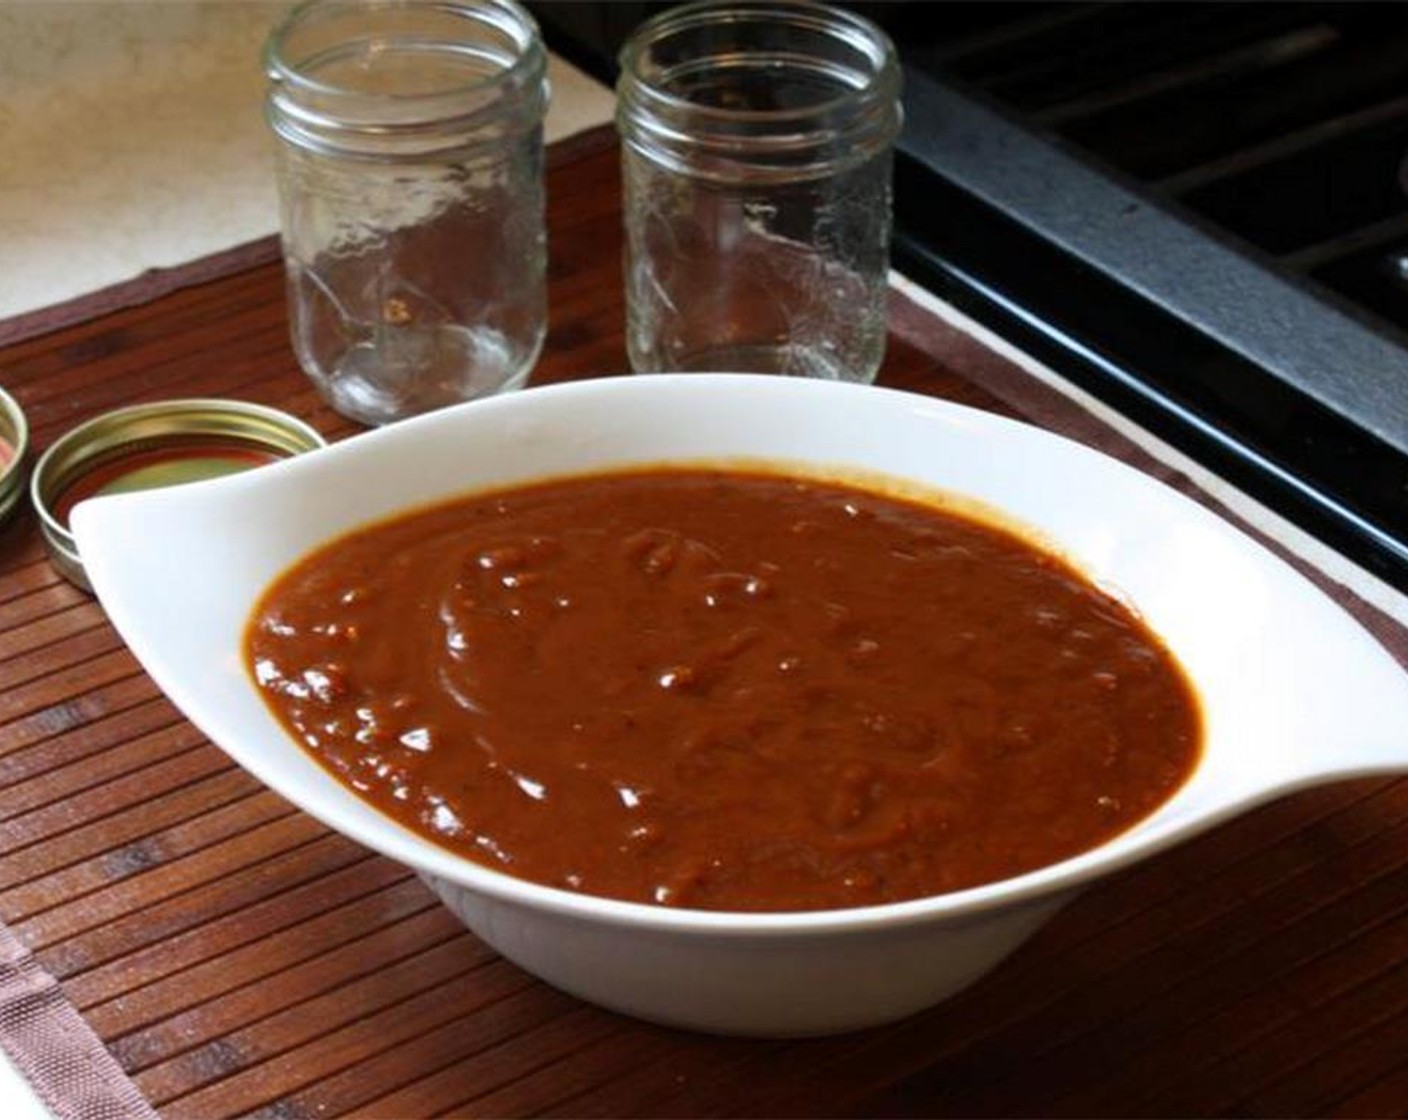 step 7 Use this sauce for grilling, a dipping sauce for your chicken fingers or for burgers. Store in glass containers in the fridge and it will remain good for at least a couple months. Enjoy!